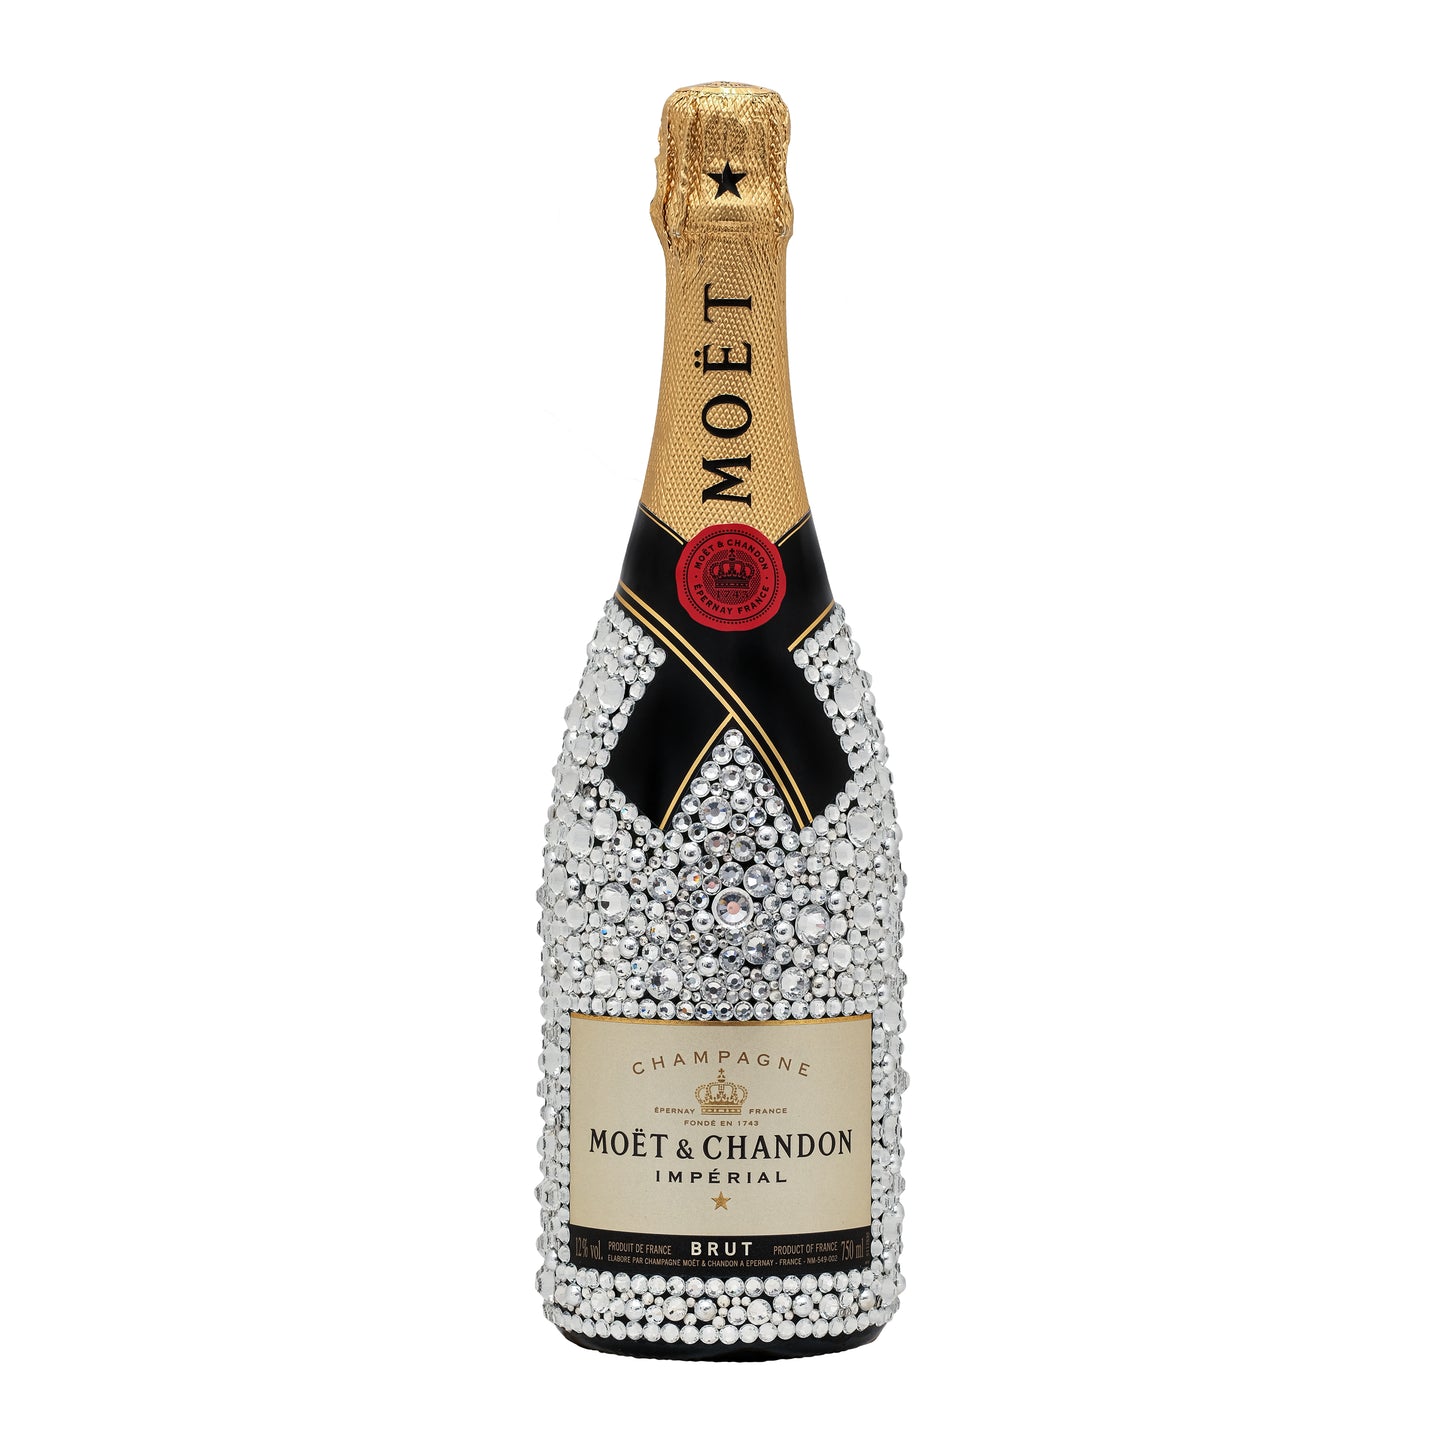 Moët & Chandon Brut Imperial decorated with cut glass stones